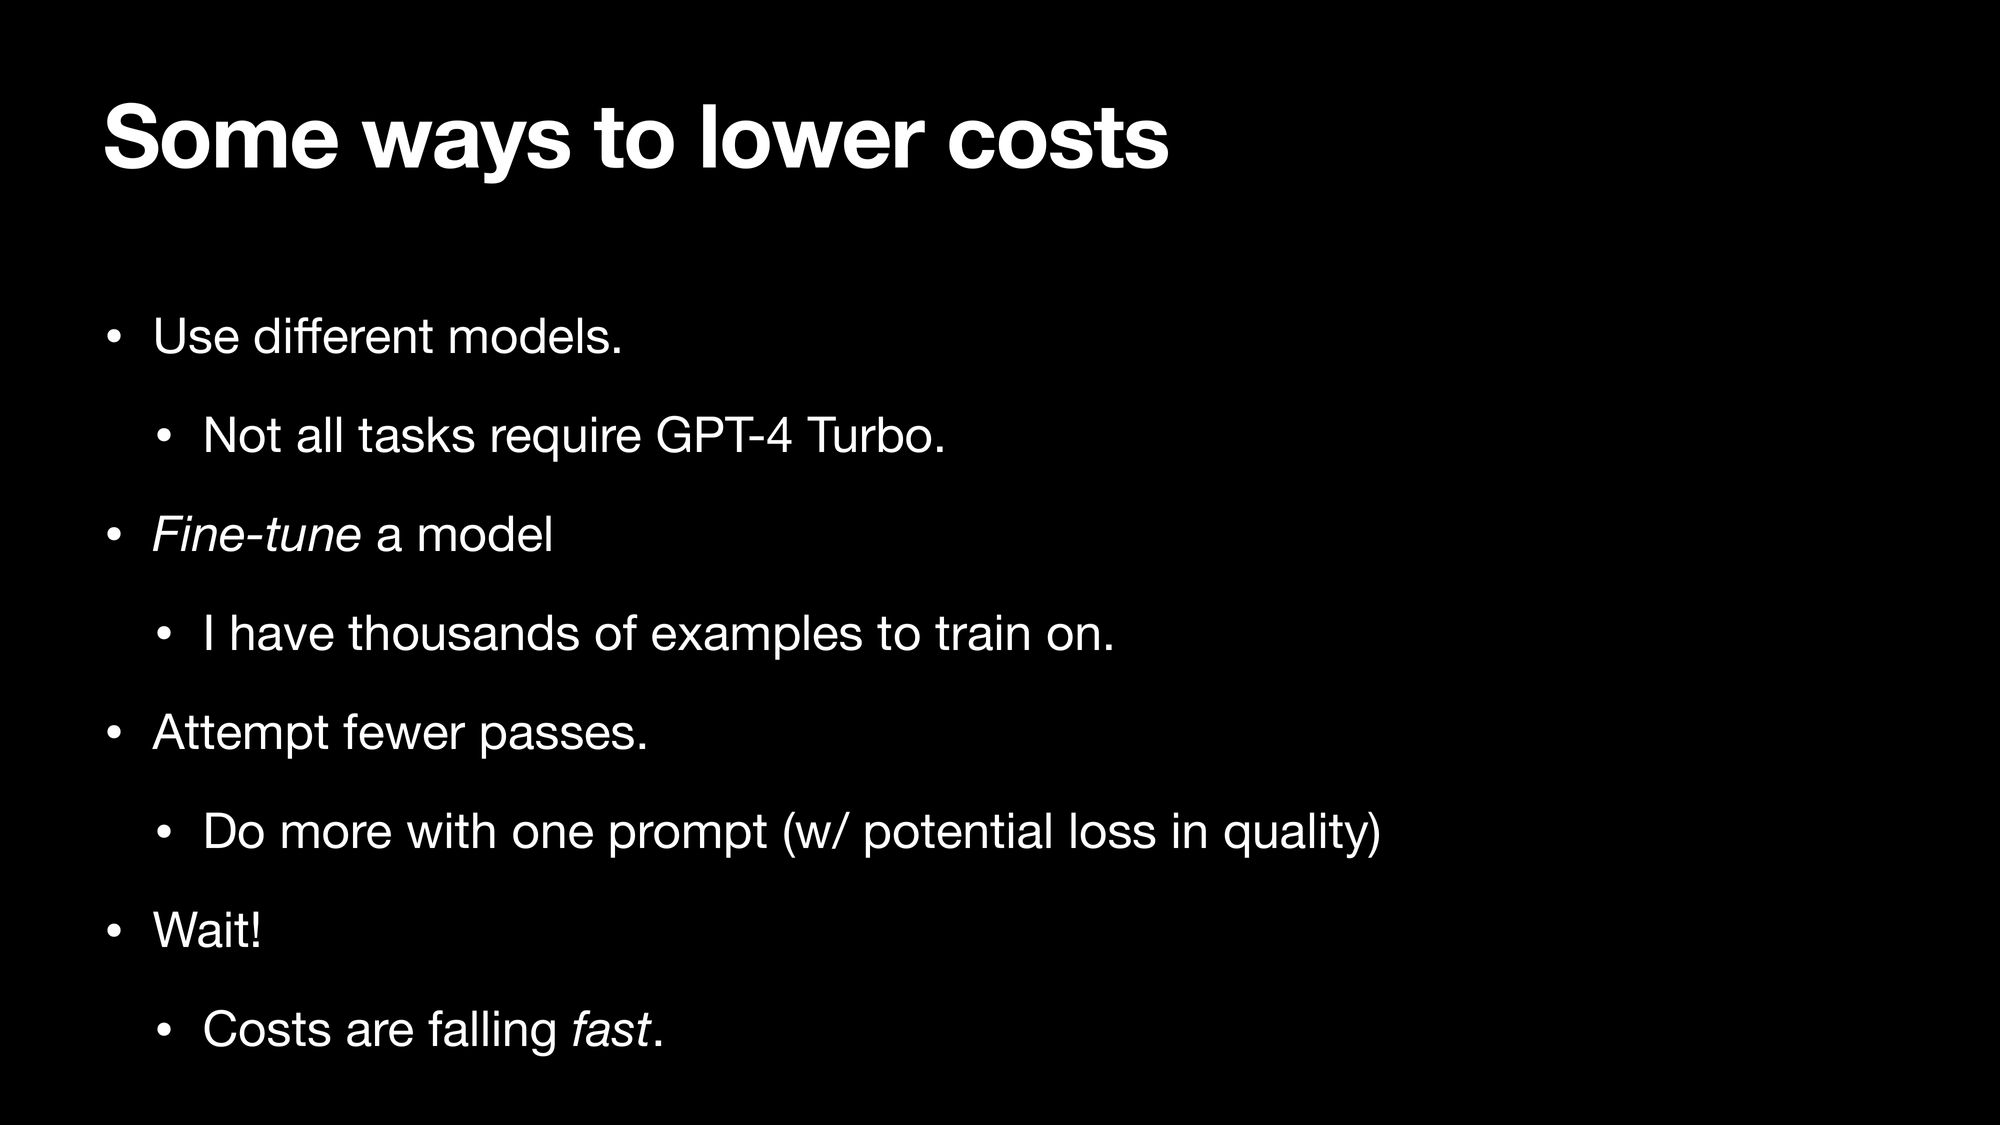 Some ways to lower costs Use different models. Not all tasks require GPT-4 Turbo. Fine-tune a model. I have thousands of examples to train on. Attempt fewer passes. Do more with one prompt (w/ potential loss in quality) Wait! Costs are falling fast.